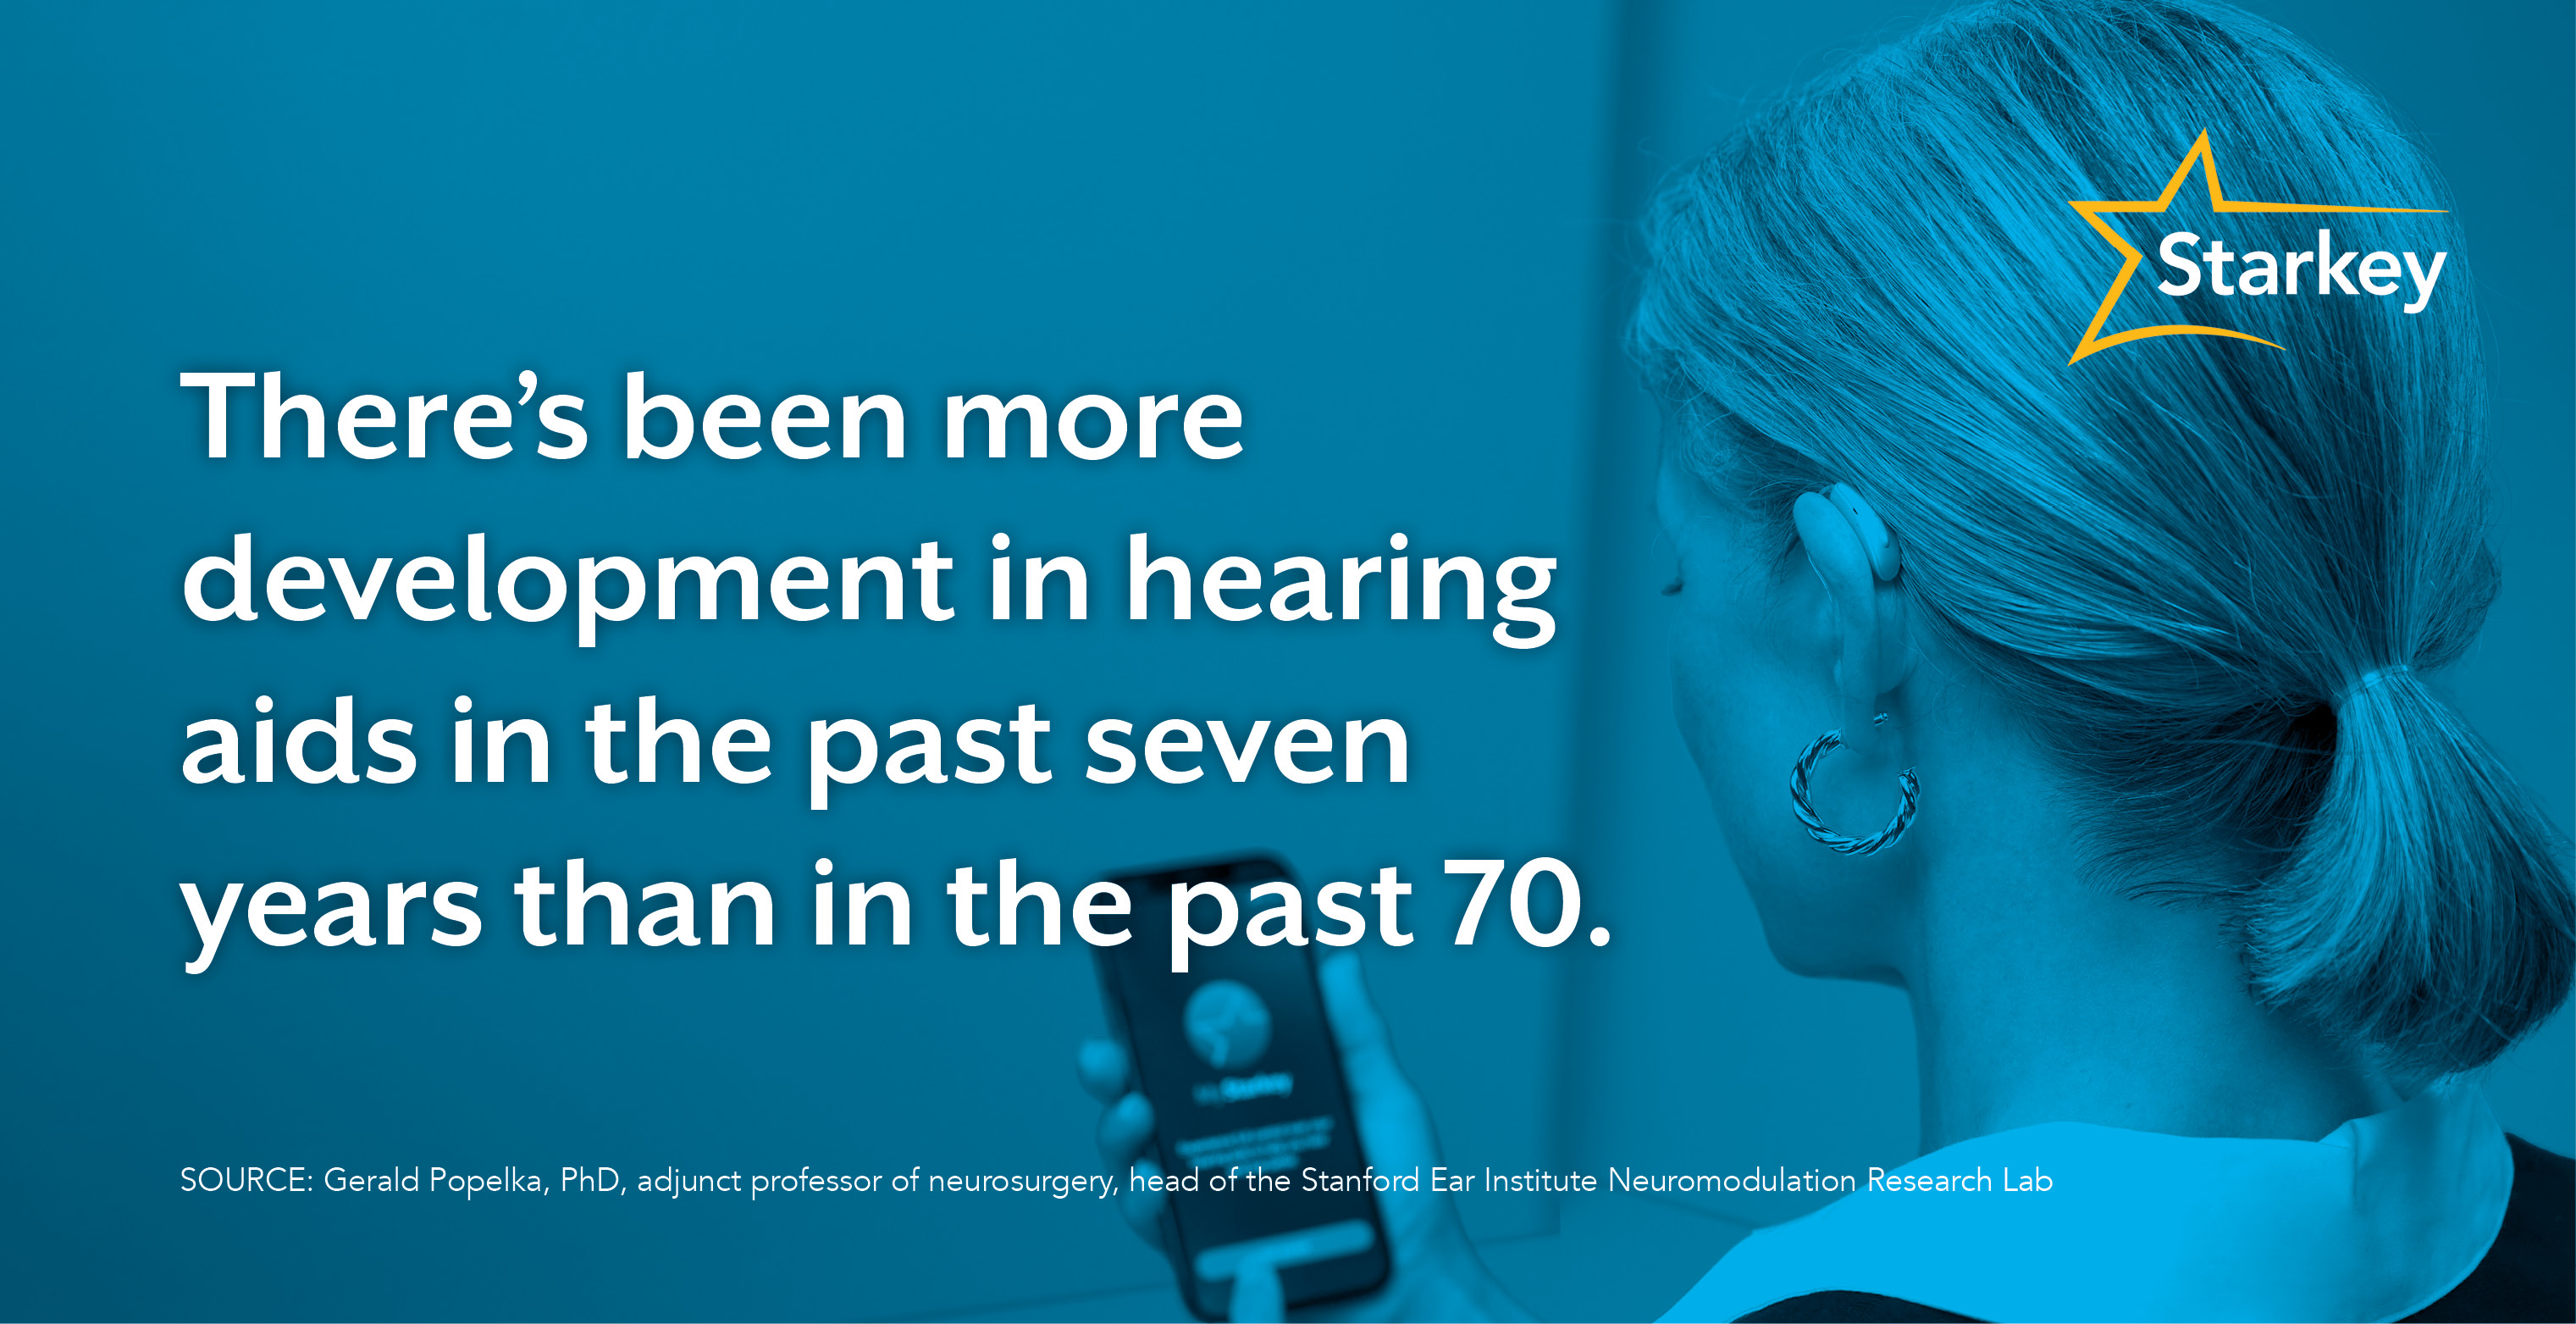 Image of woman wearing a hearing aid and looking at her mobile phone, beside the quote, "There's been more development in hearing aids in the past seven years than in the past 70."